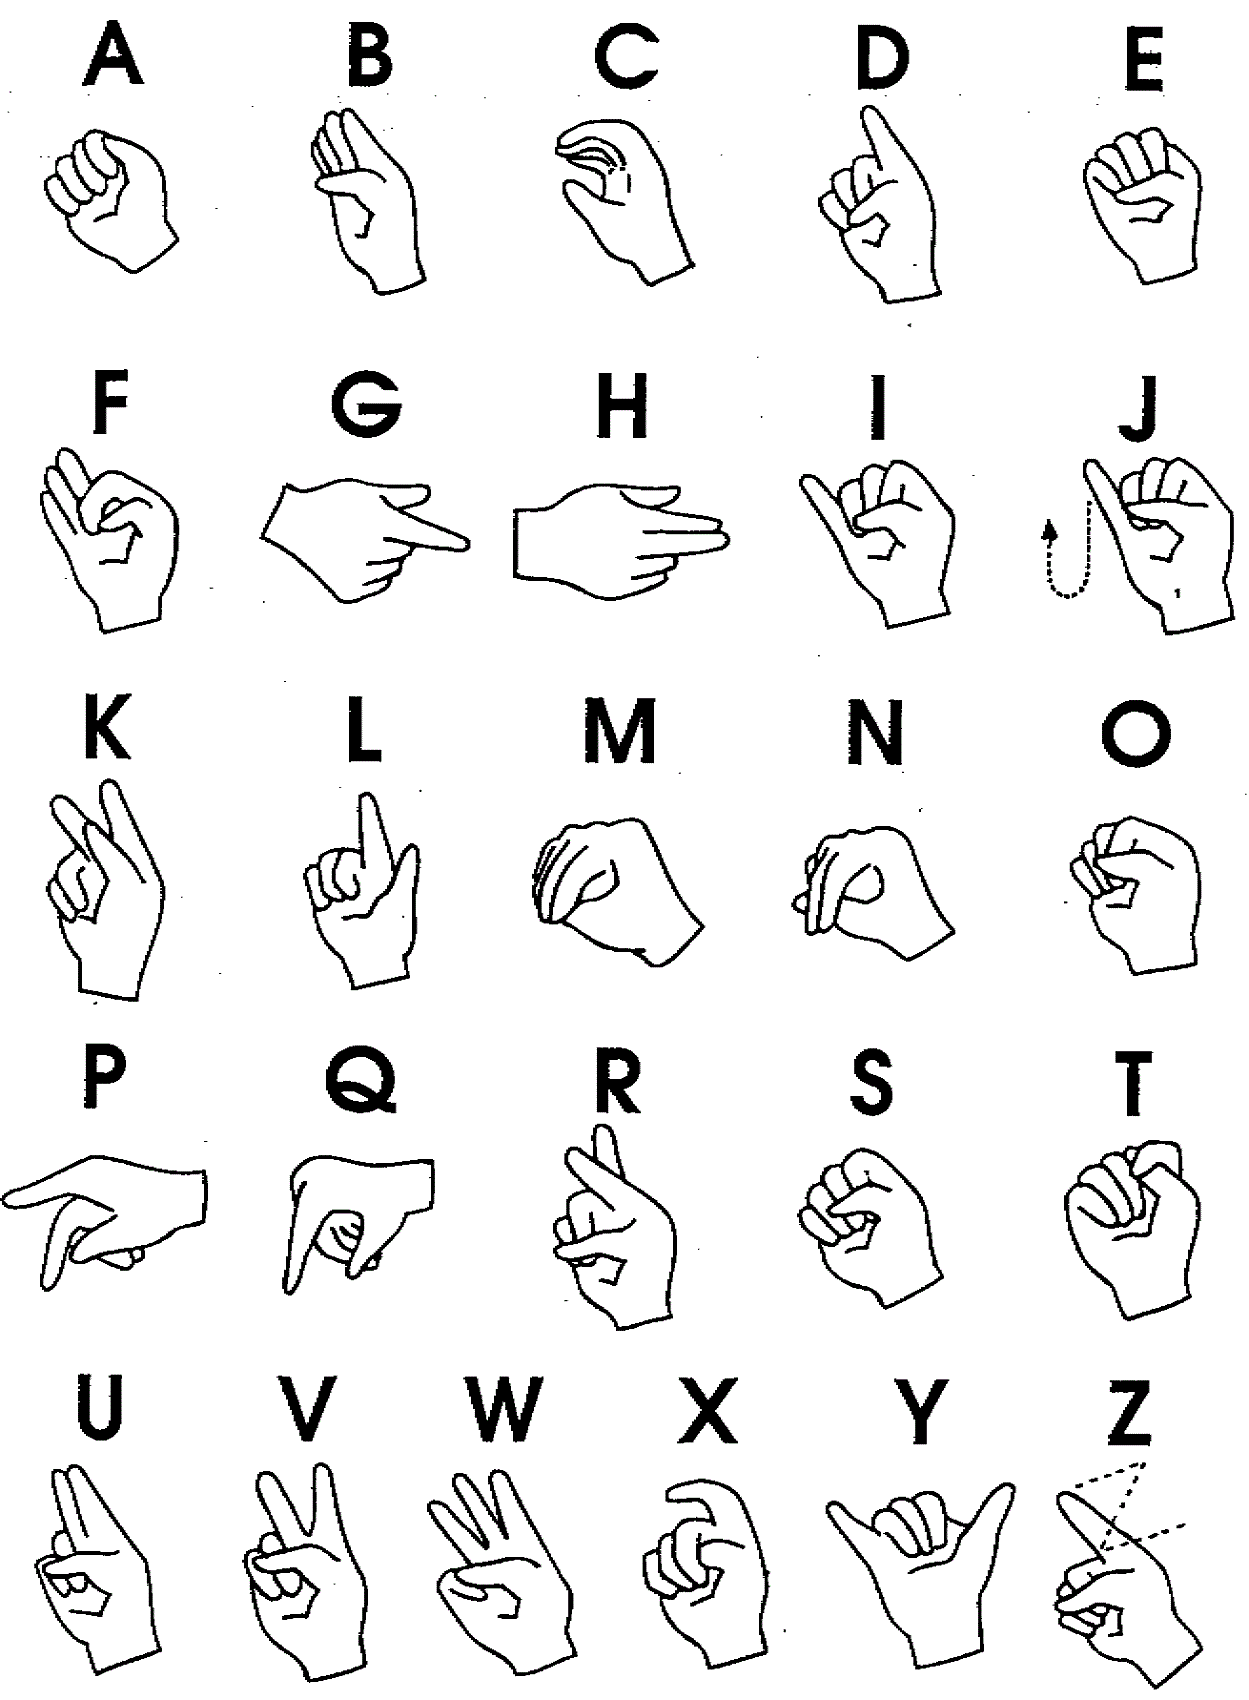 Printable sign language charts to help you in learning sign language. 